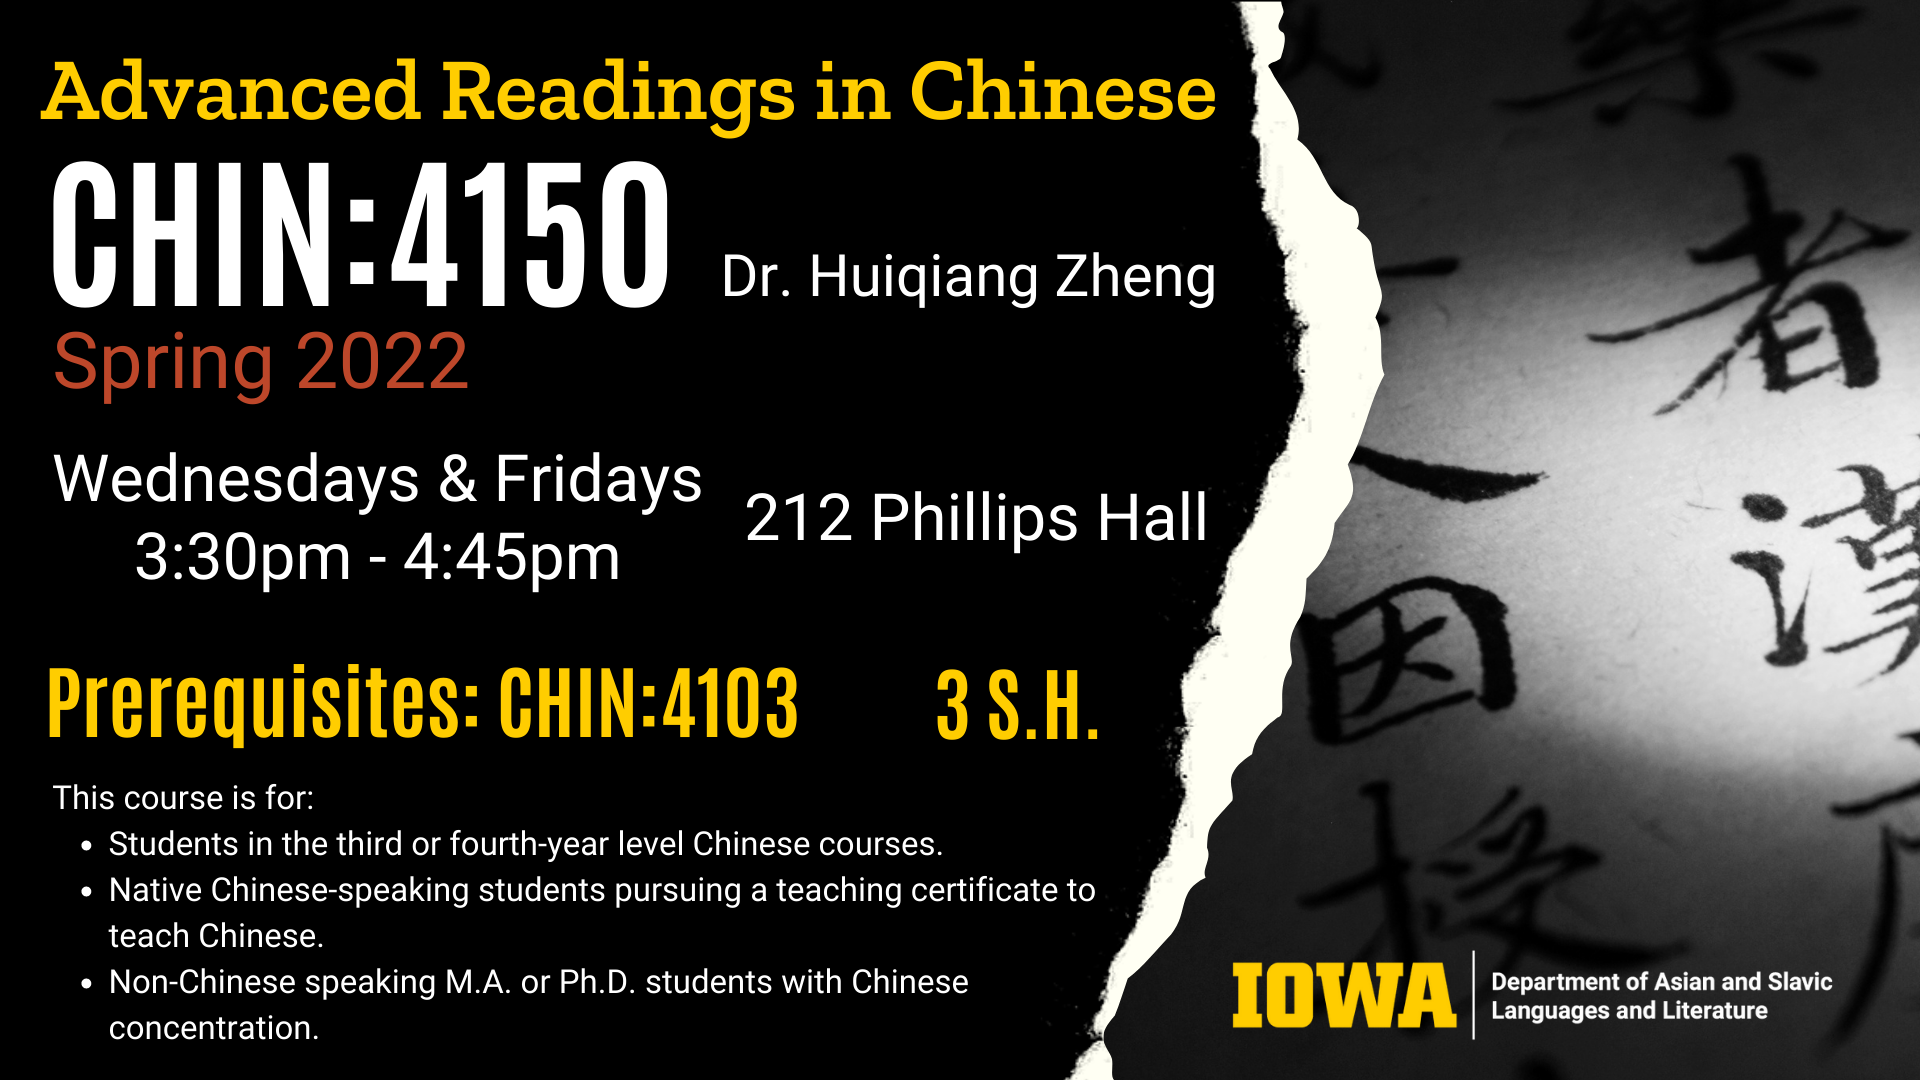 Advanced Readings in Chinese CHIN 4150 is happening Spring 2022. Taught by Doctor Huiqiang Zheng. Wednesdays and Fridays from 3:30pm - 4:45pm in 212 Phillips Hall. Prerequisites are CHIN 4103. The course is 3 credit hours. This course is for Students in the third or fourth-year level Chinese courses. Native Chinese-speaking students pursuing a teaching certificate to teach Chinese. Non-Chinese speaking M.A. or Ph.D. students with Chinese concentration.